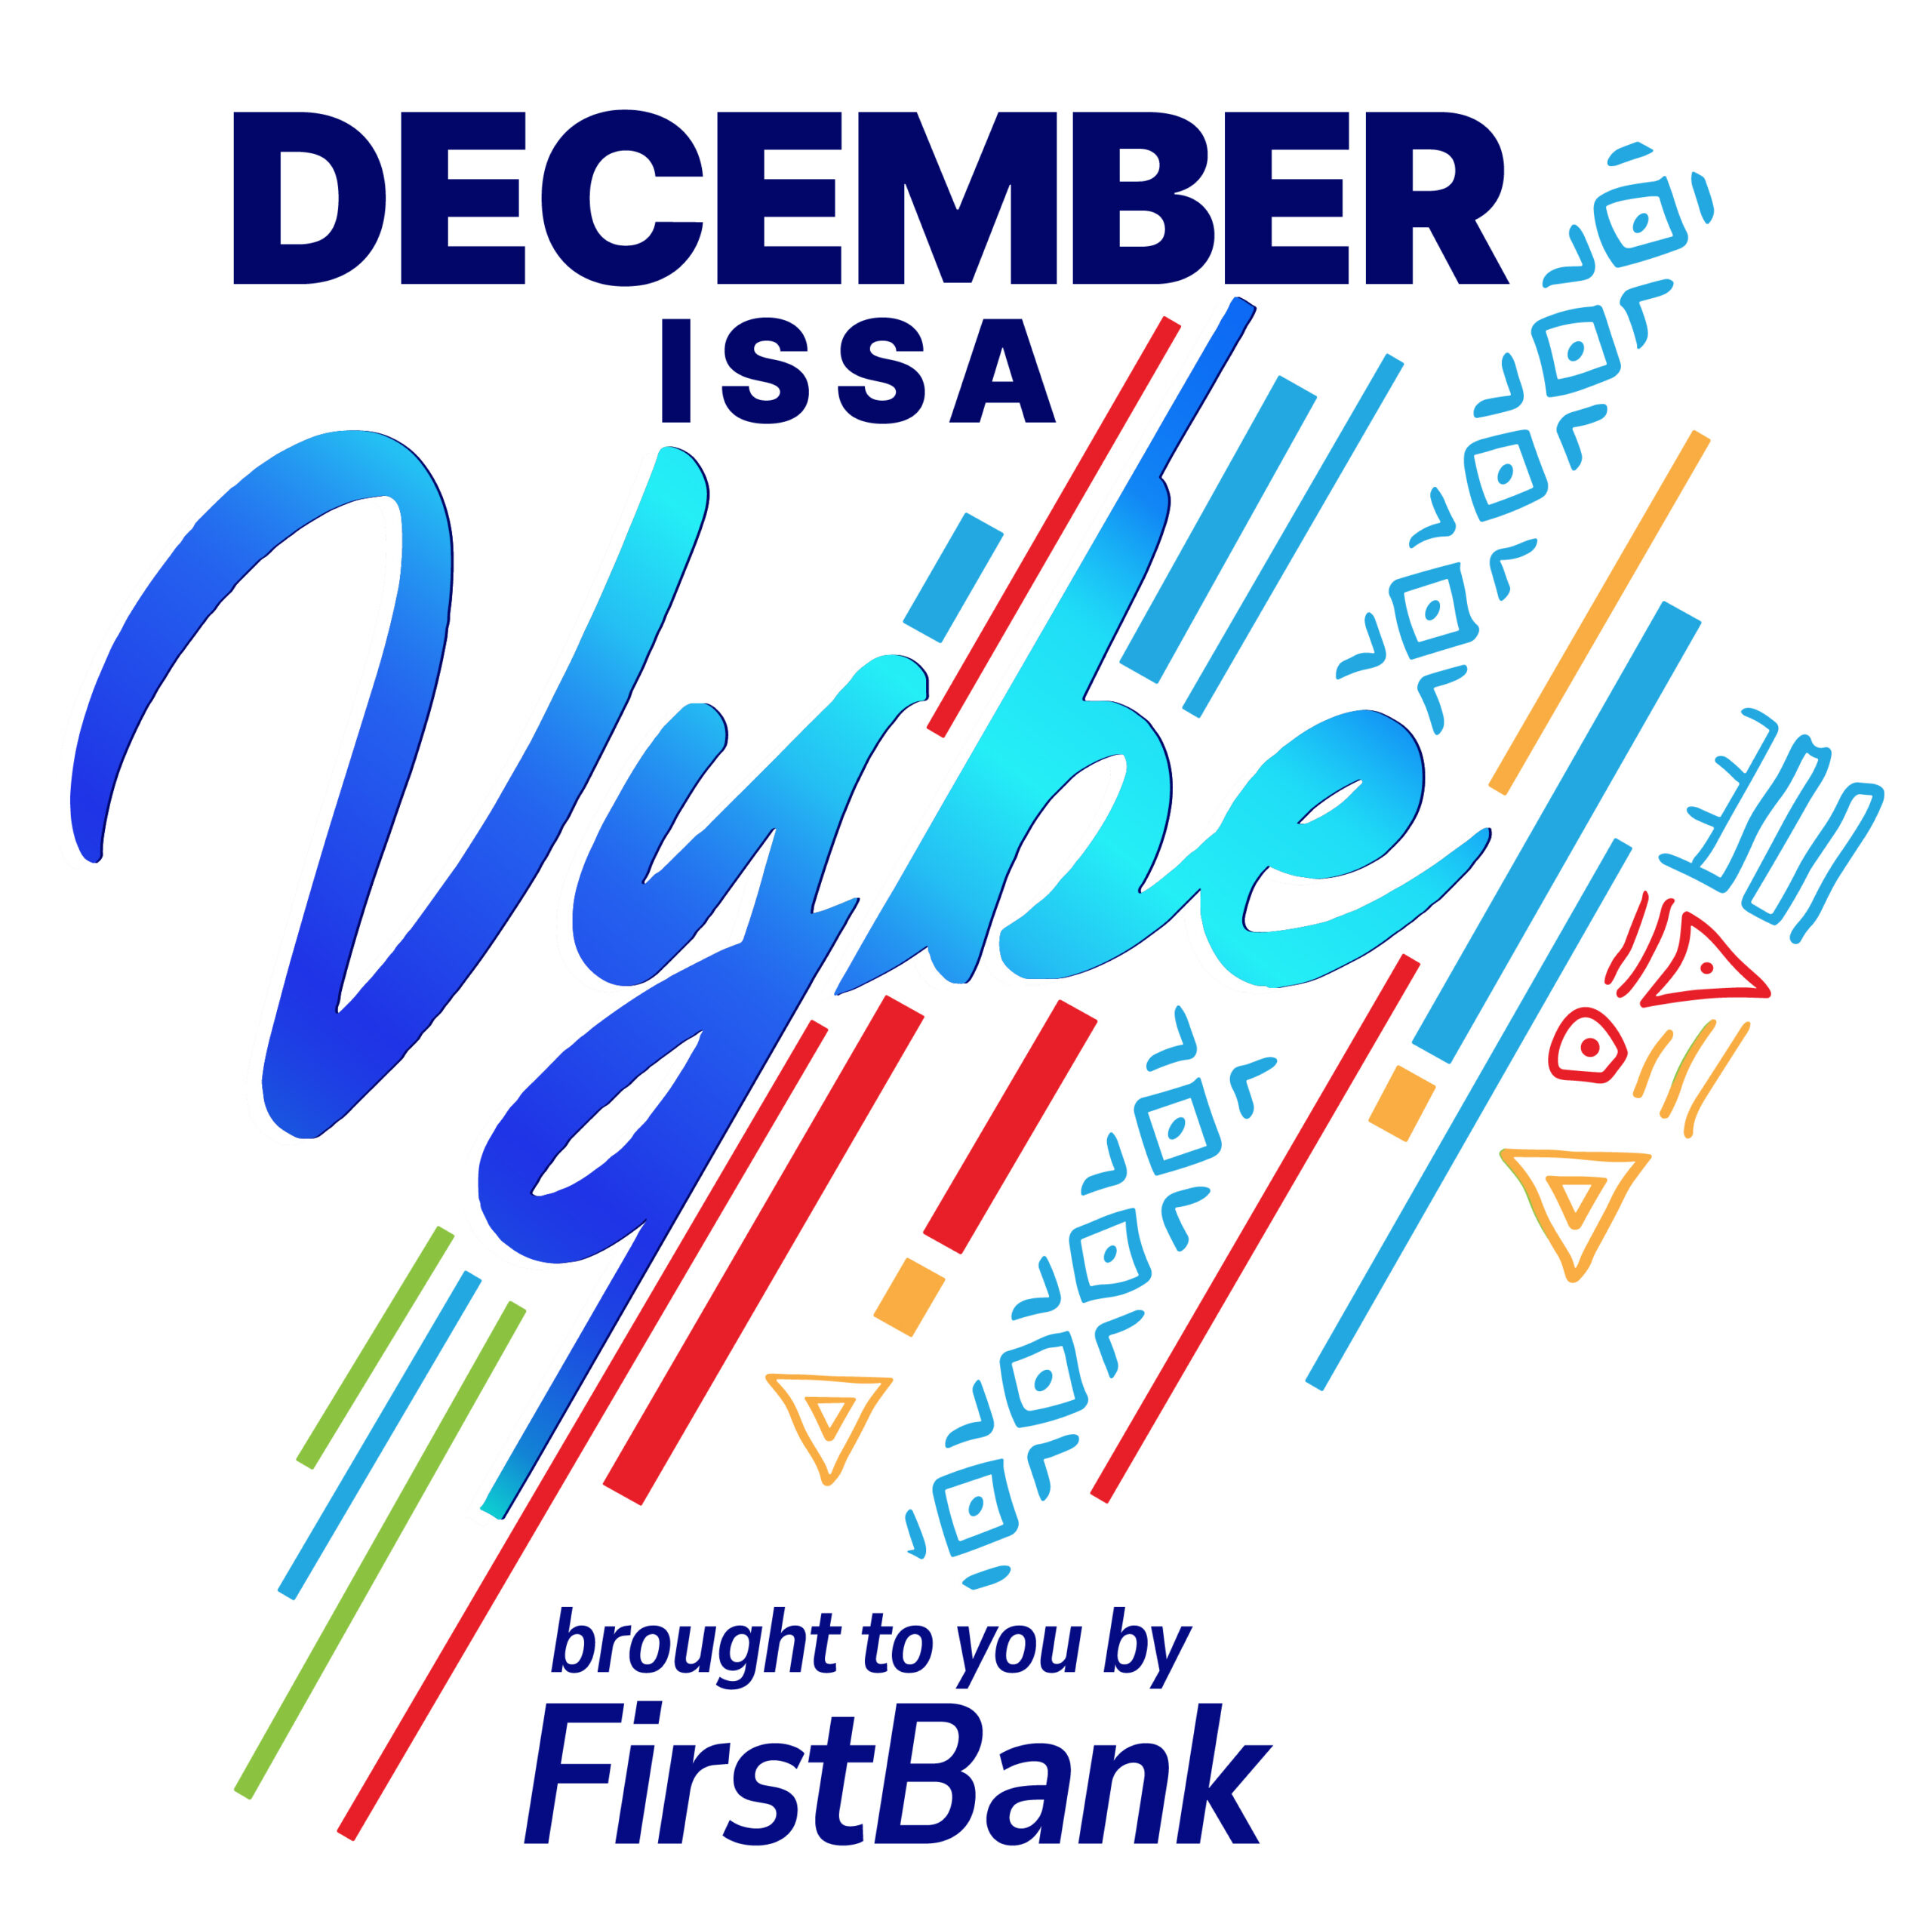 Homecoming with Firstbank December is savybe 2023: Nigerians, get ready to vibe